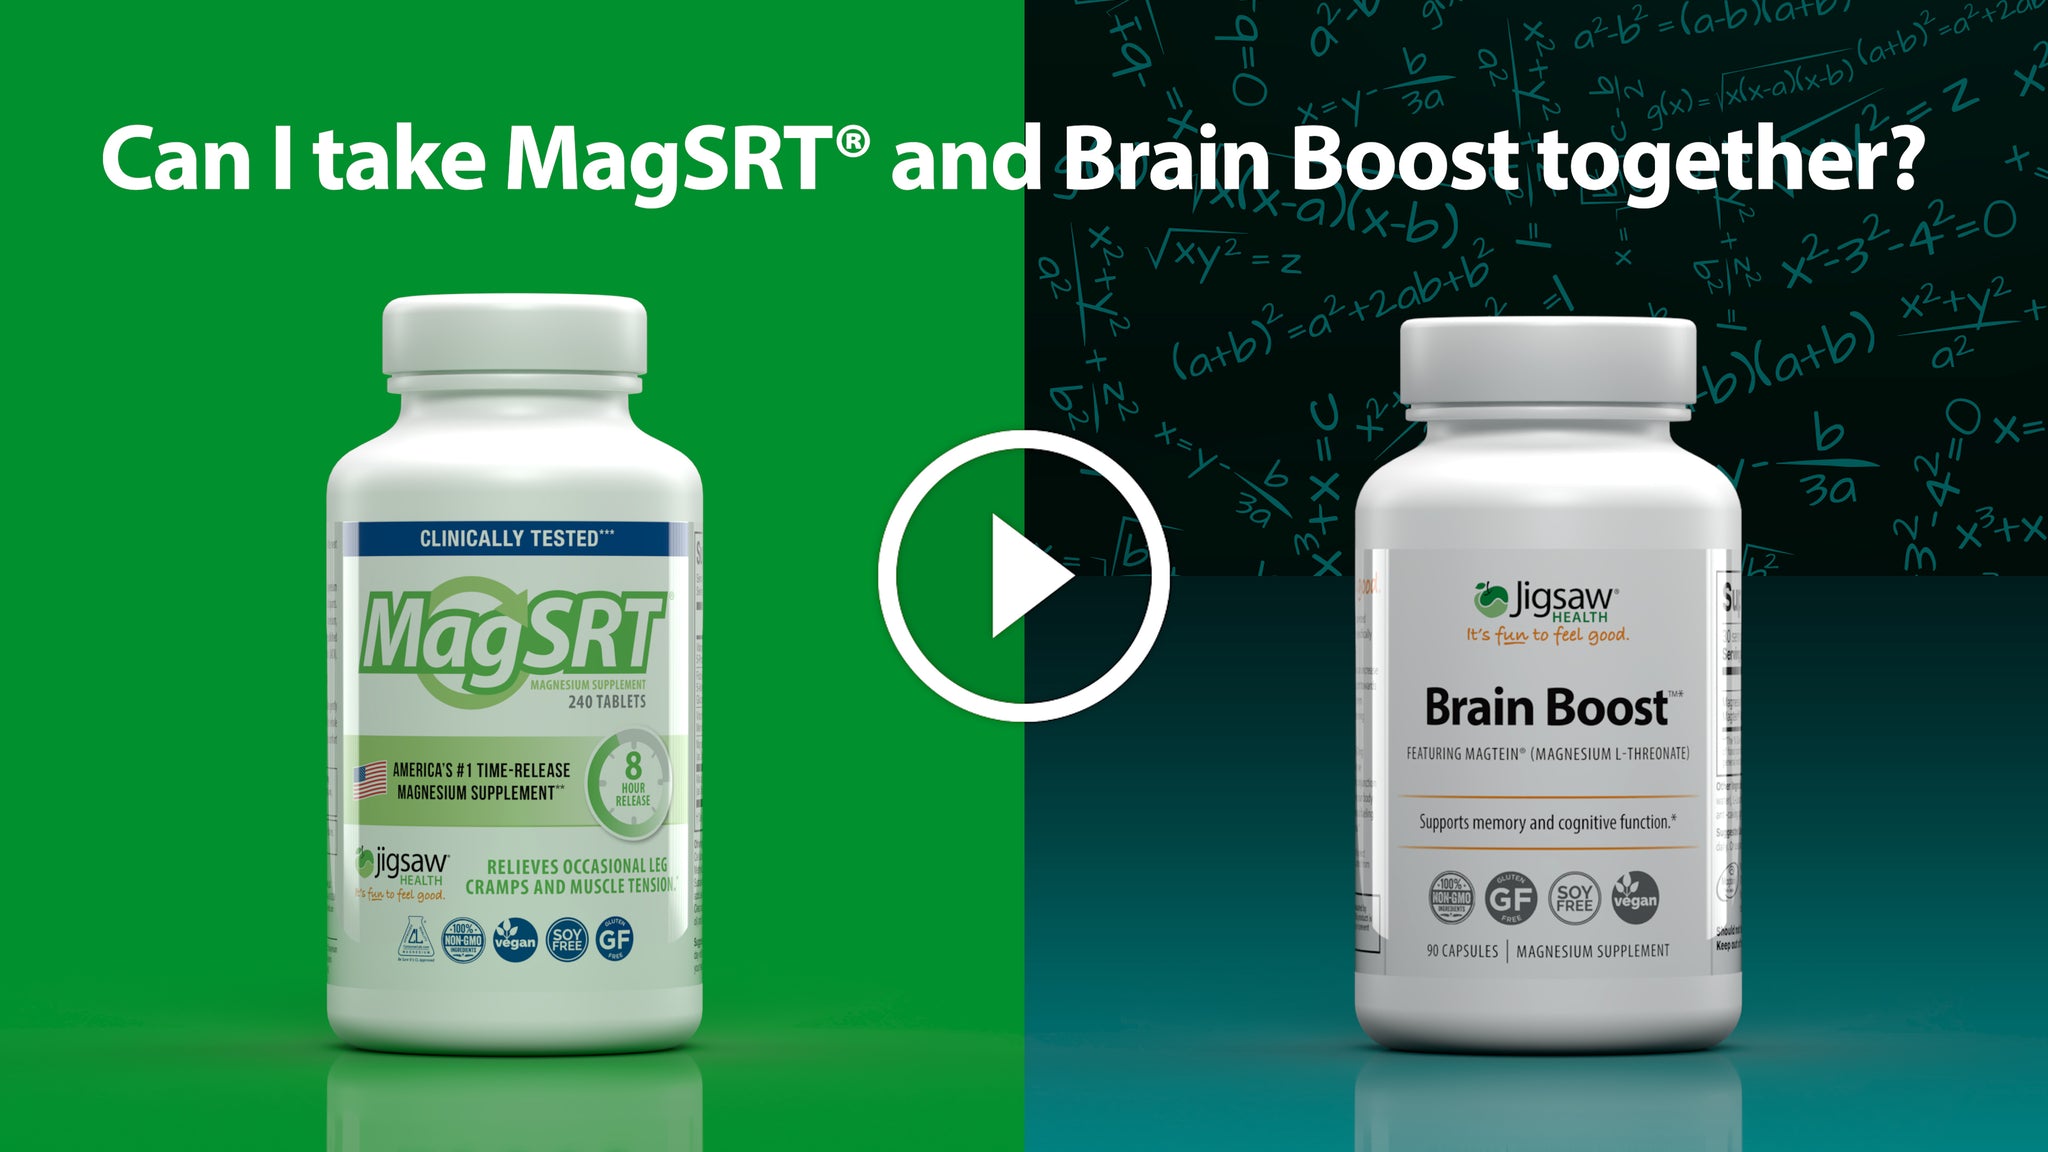 Can I take MagSRT and Brain Boost Together?